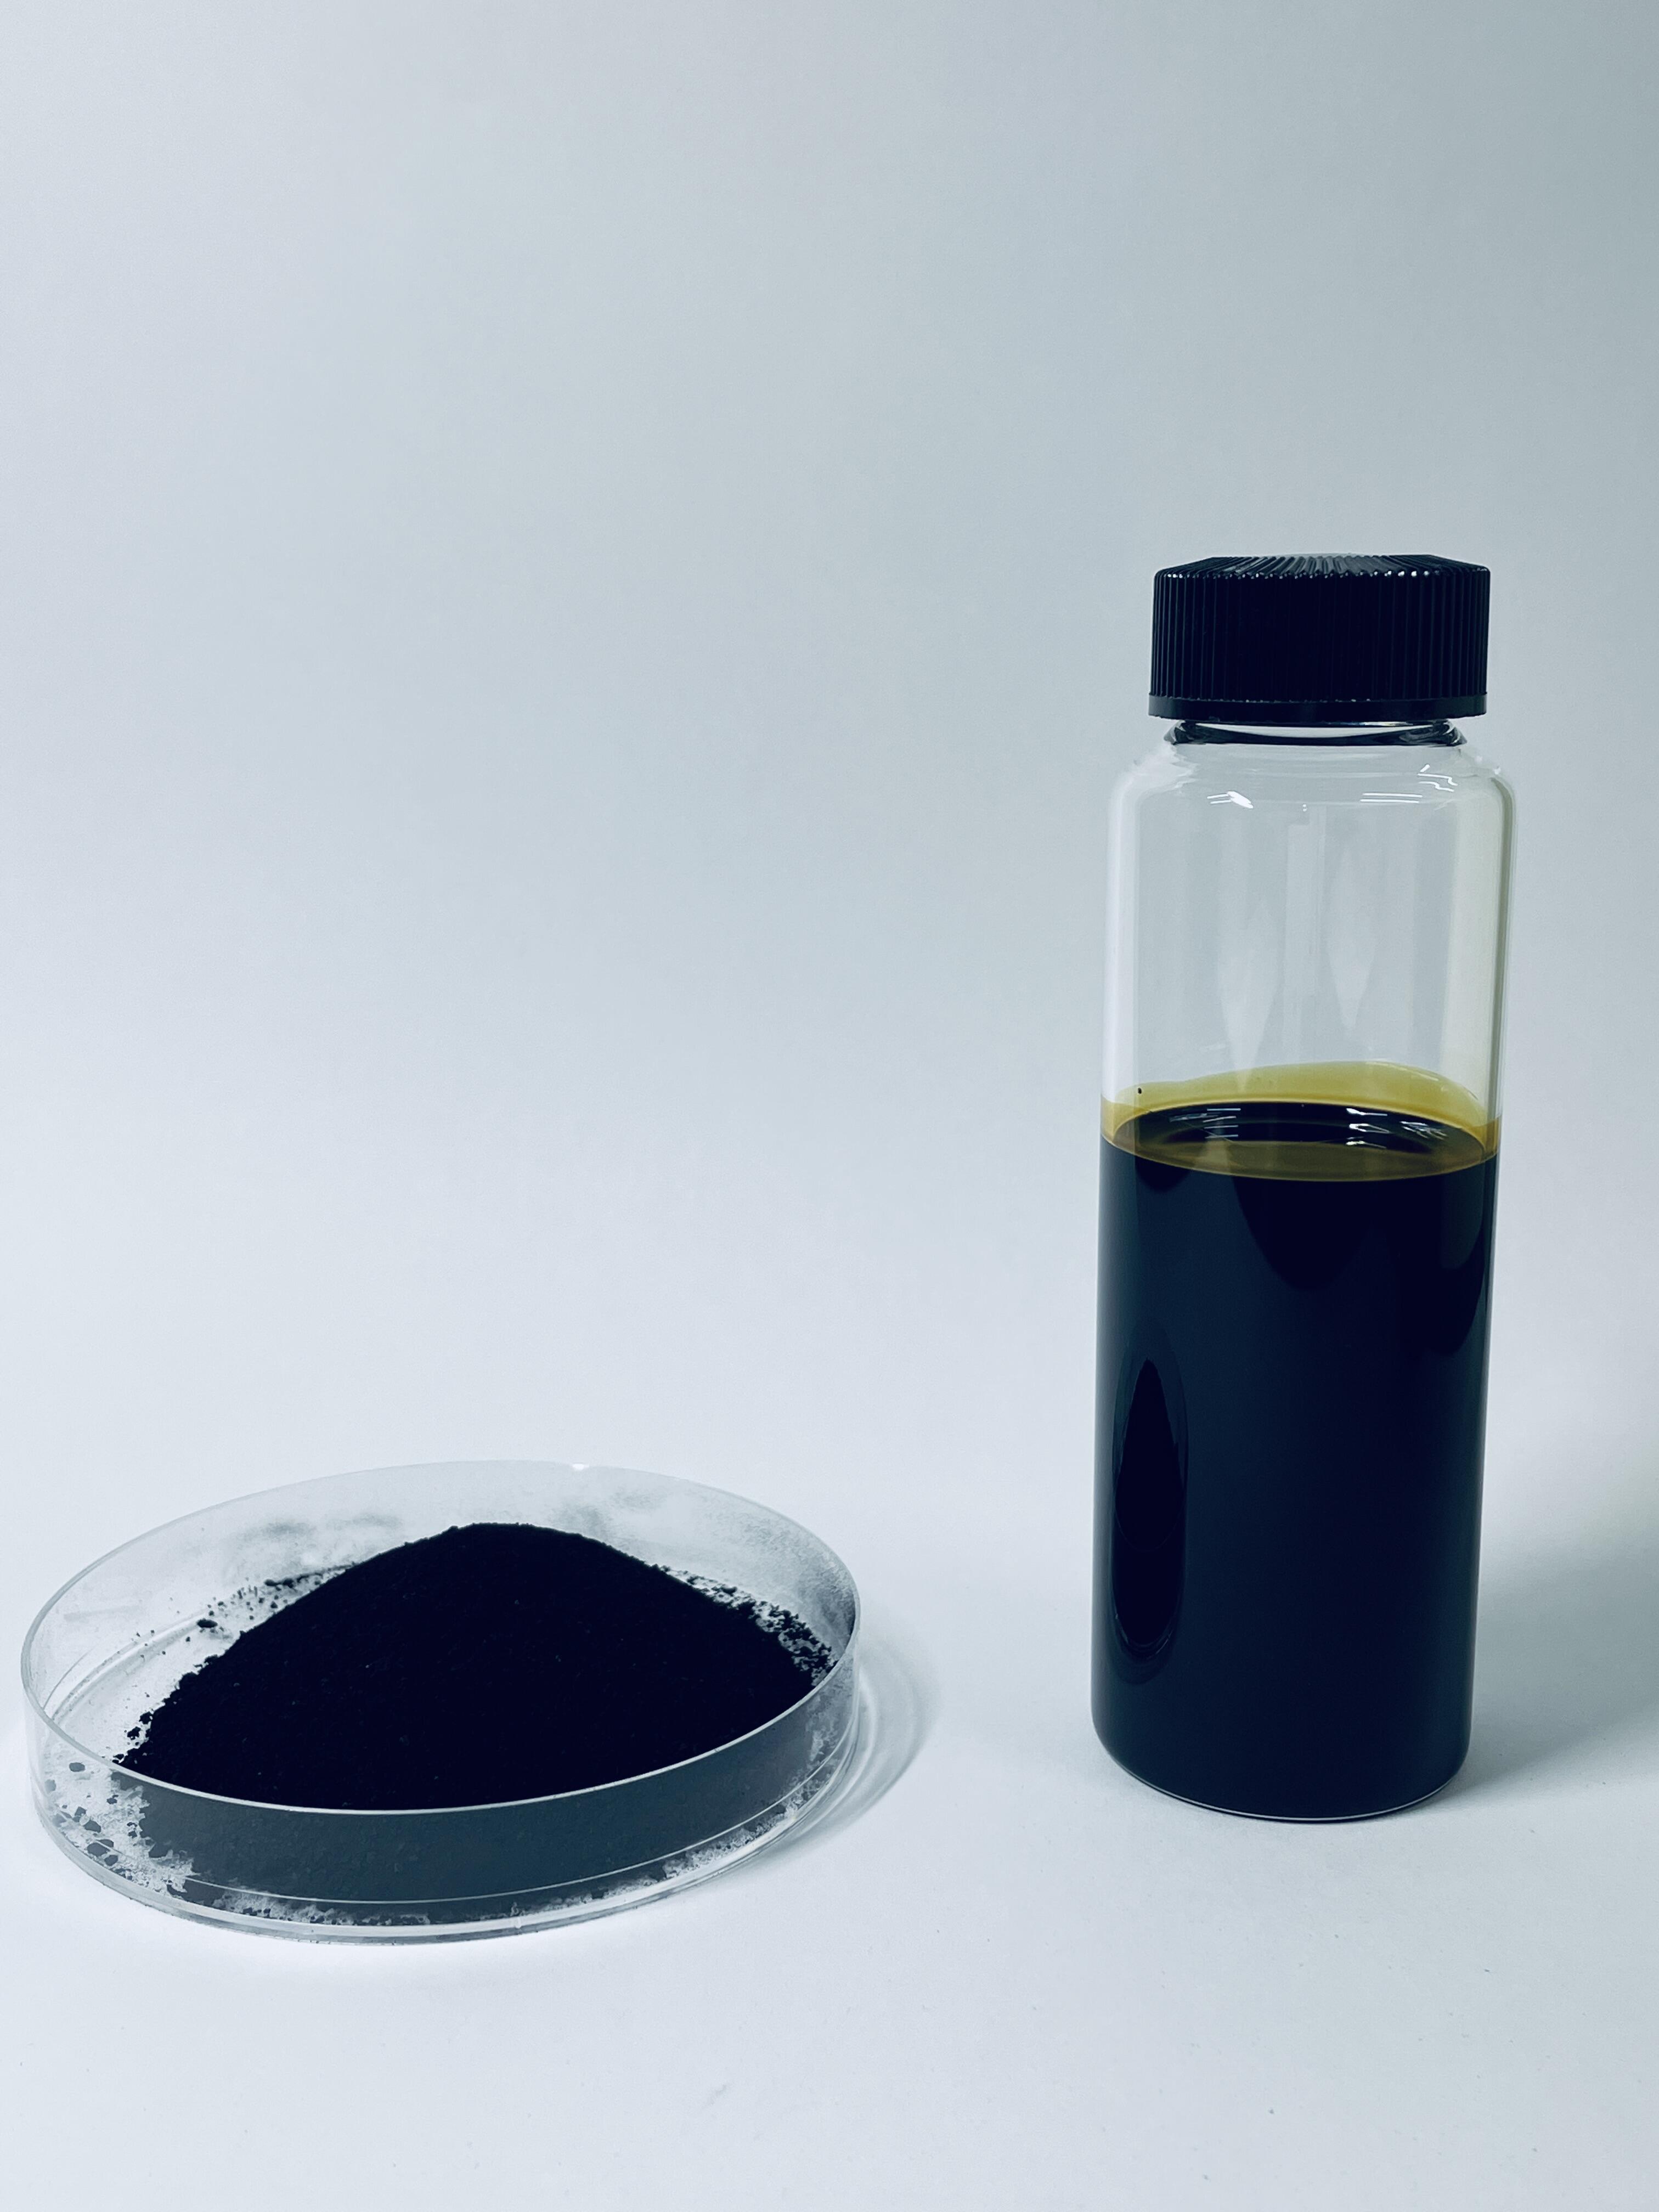 Recovered carbon black (left) and tire derived oil (right)